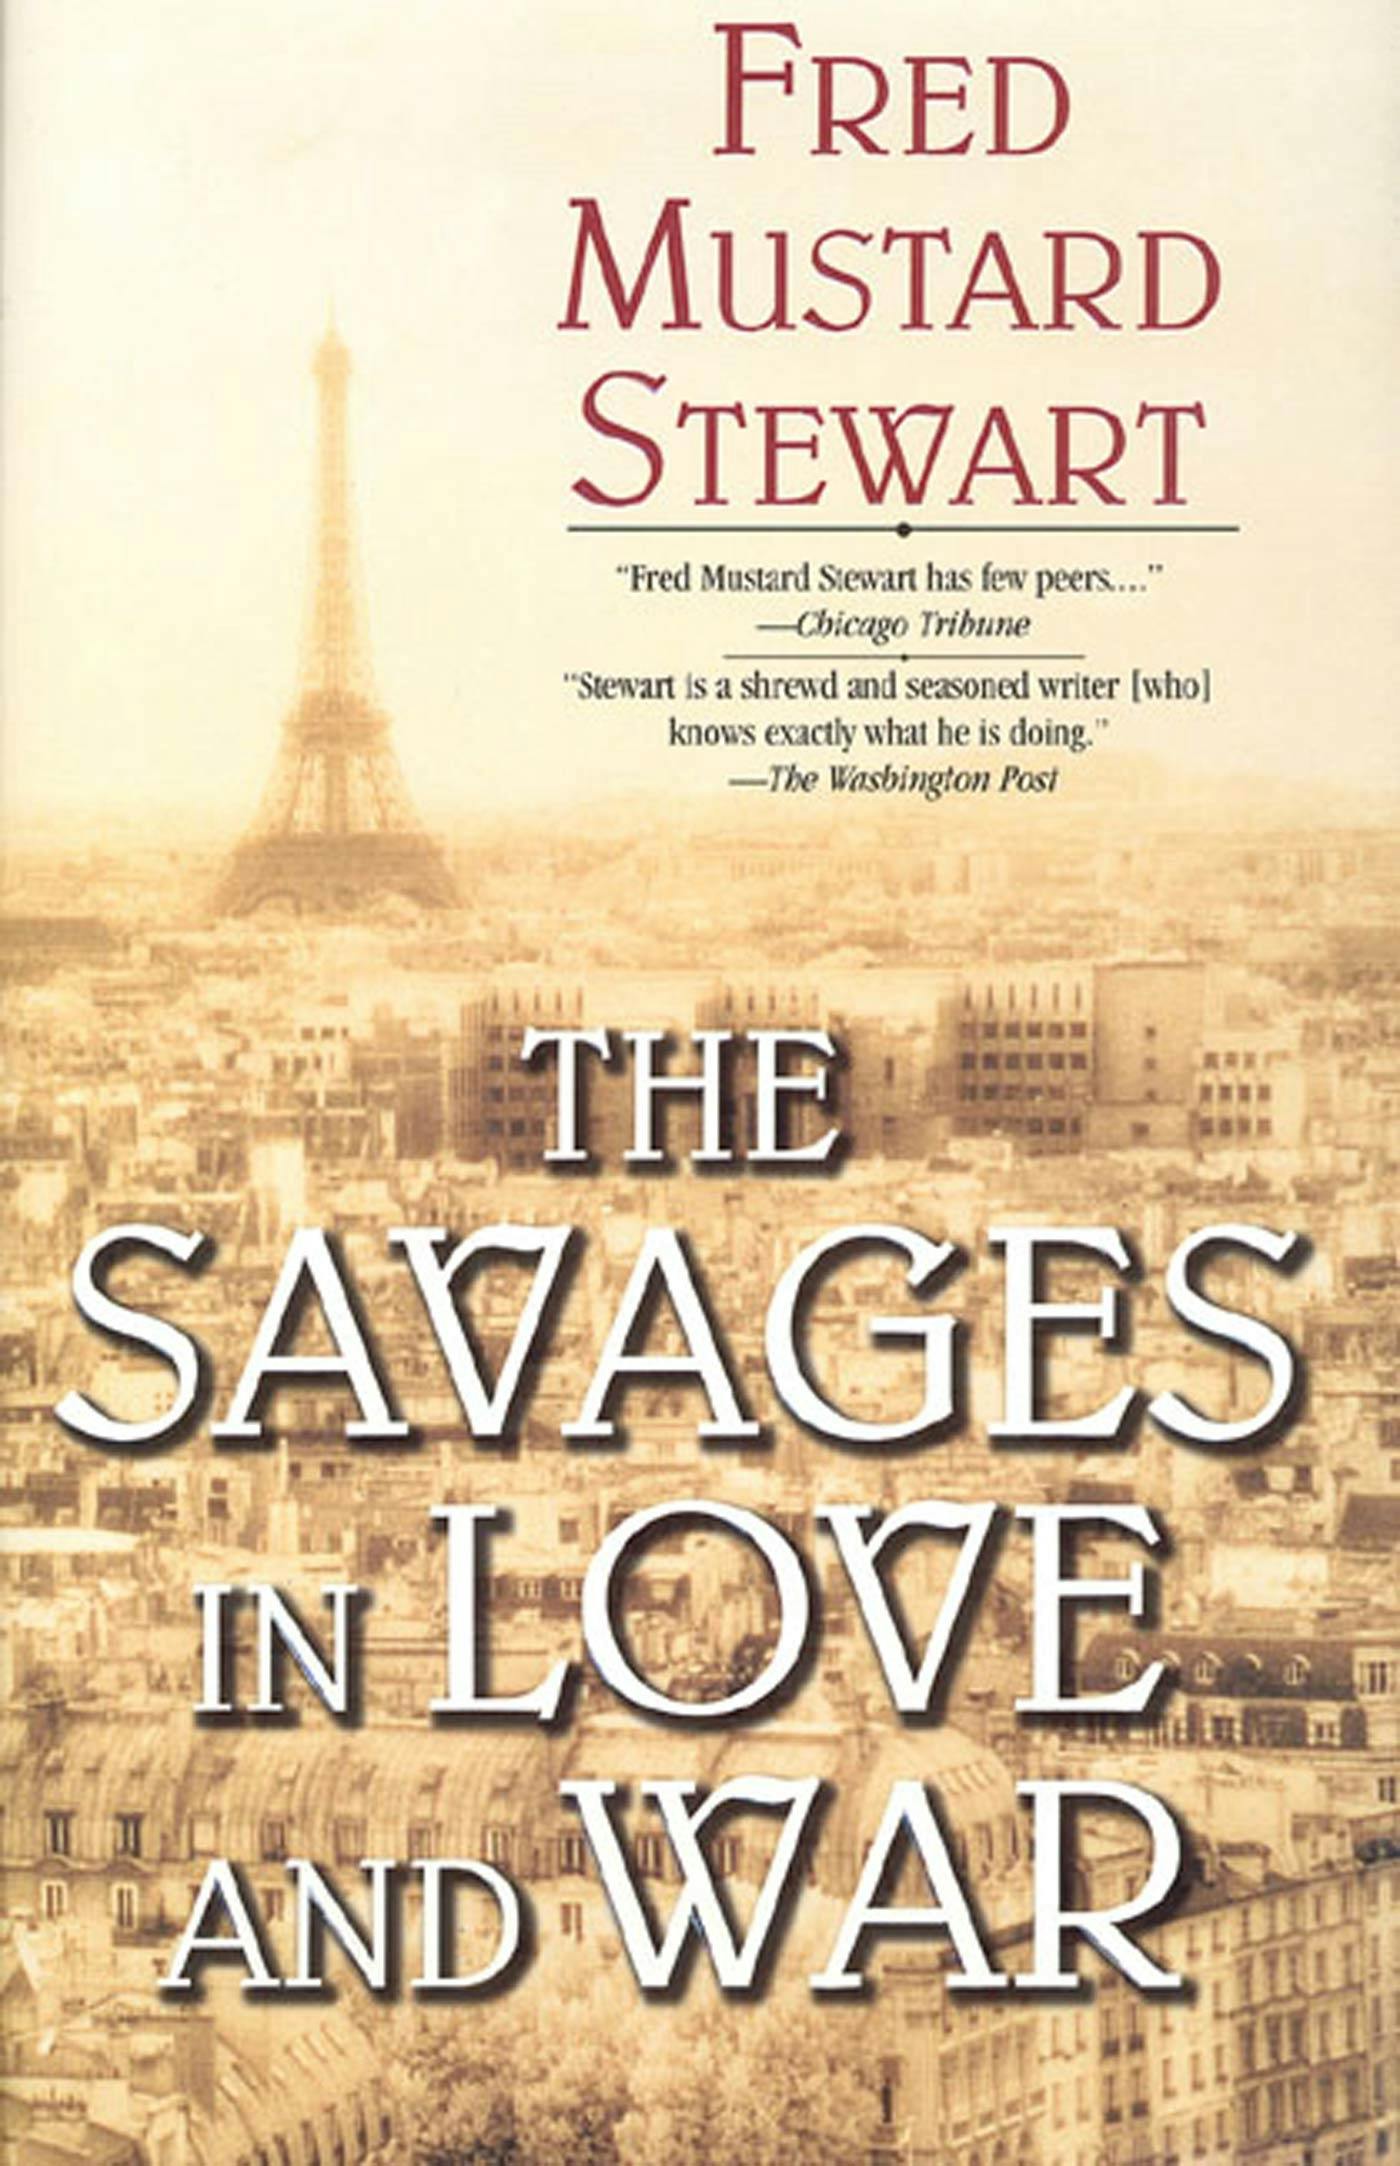 Cover for the book titled as: The Savages in Love and War